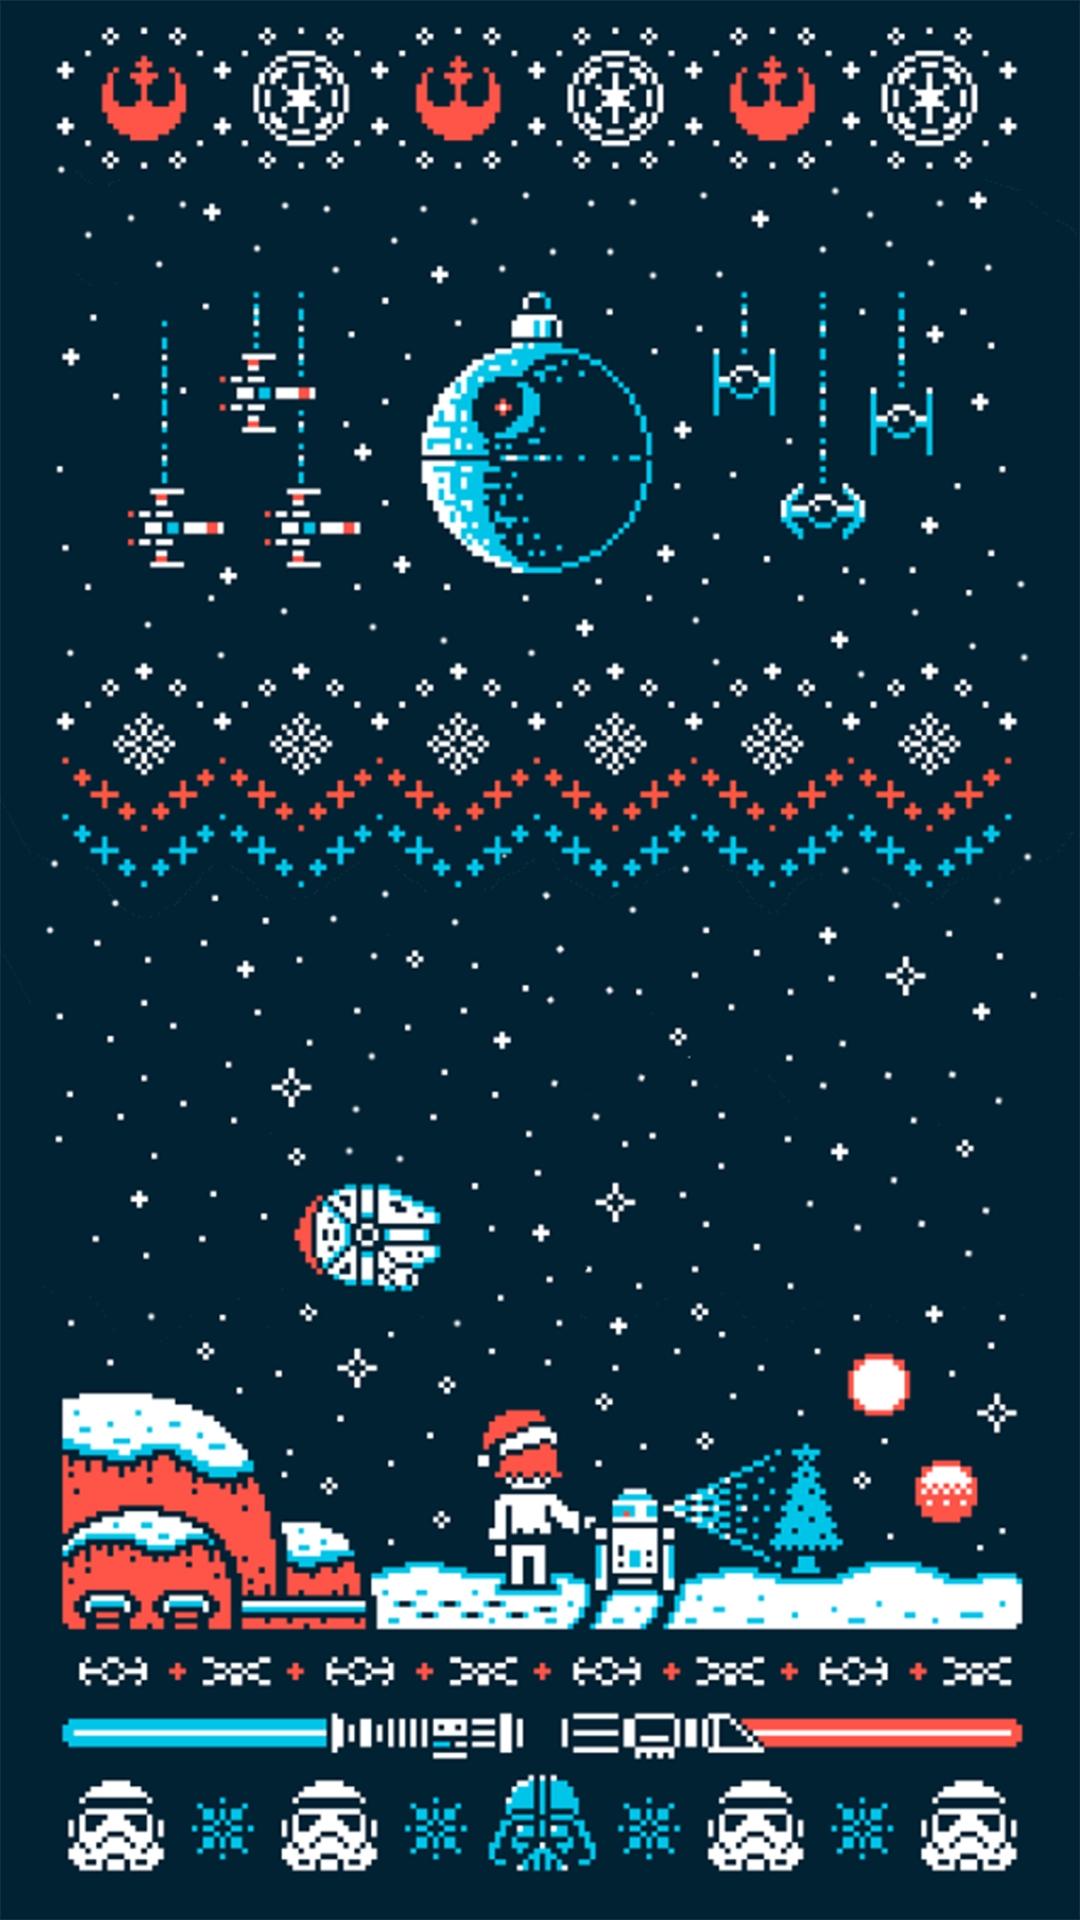 25 Free Christmas Wallpapers for iPhone